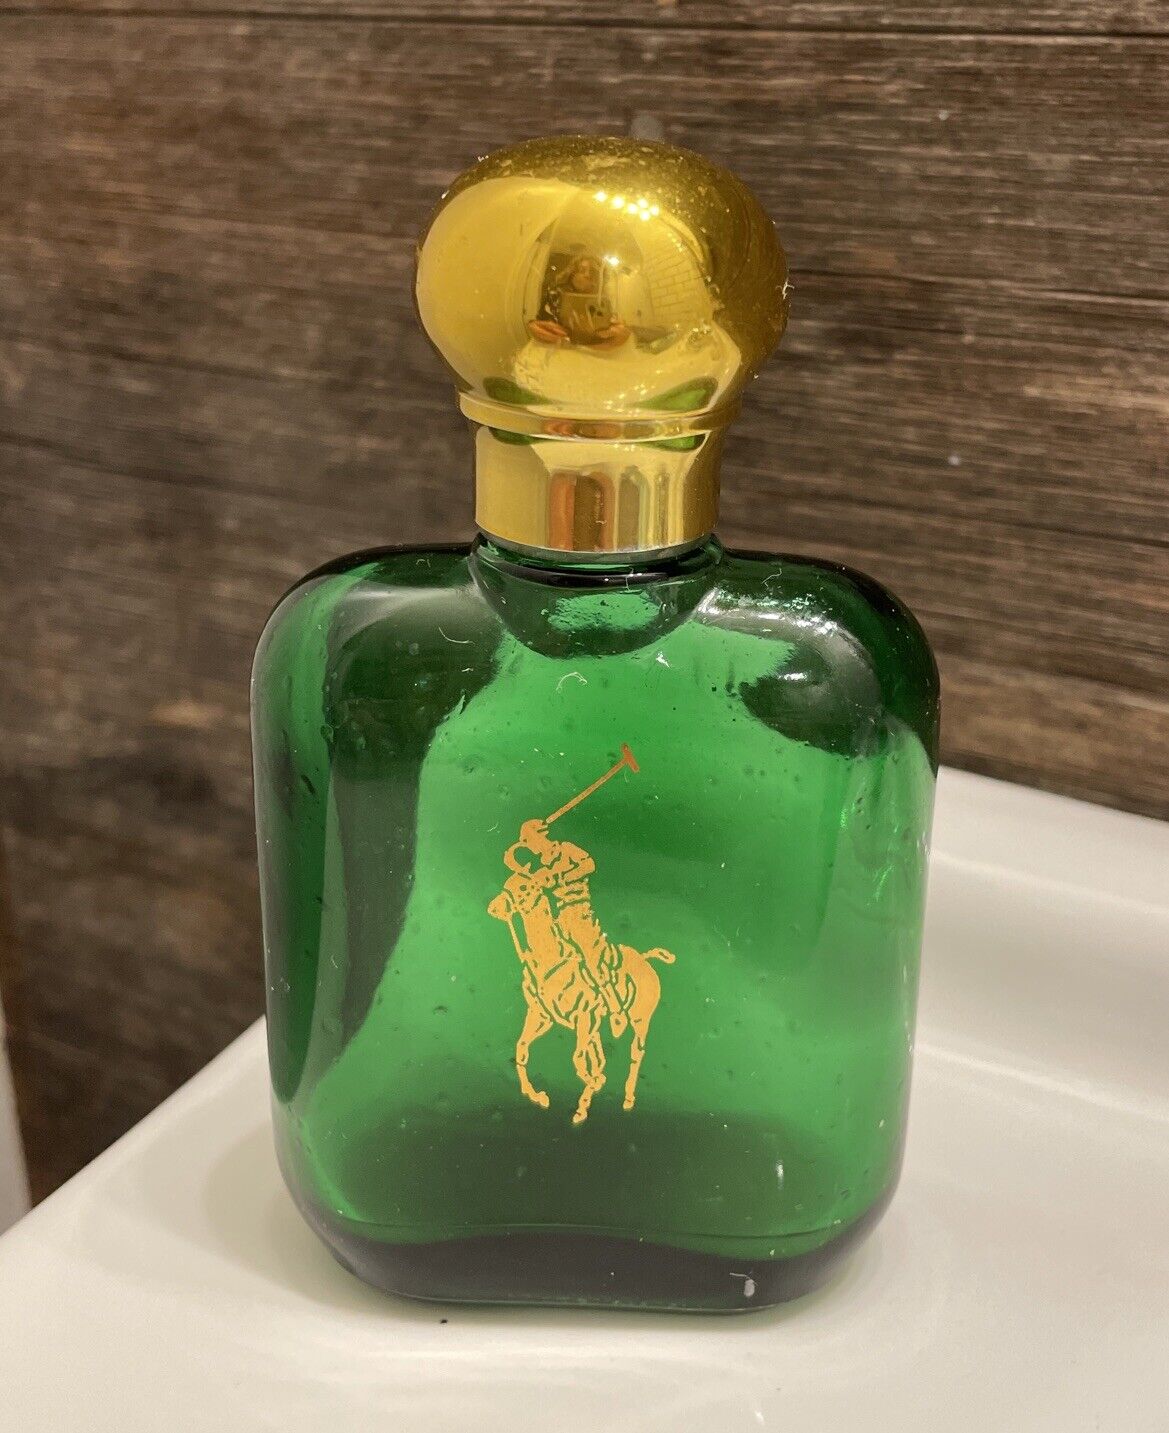 Vintage 1878 Ralph Lauren Polo After Shave Bottle With A Few Drops In Bottom